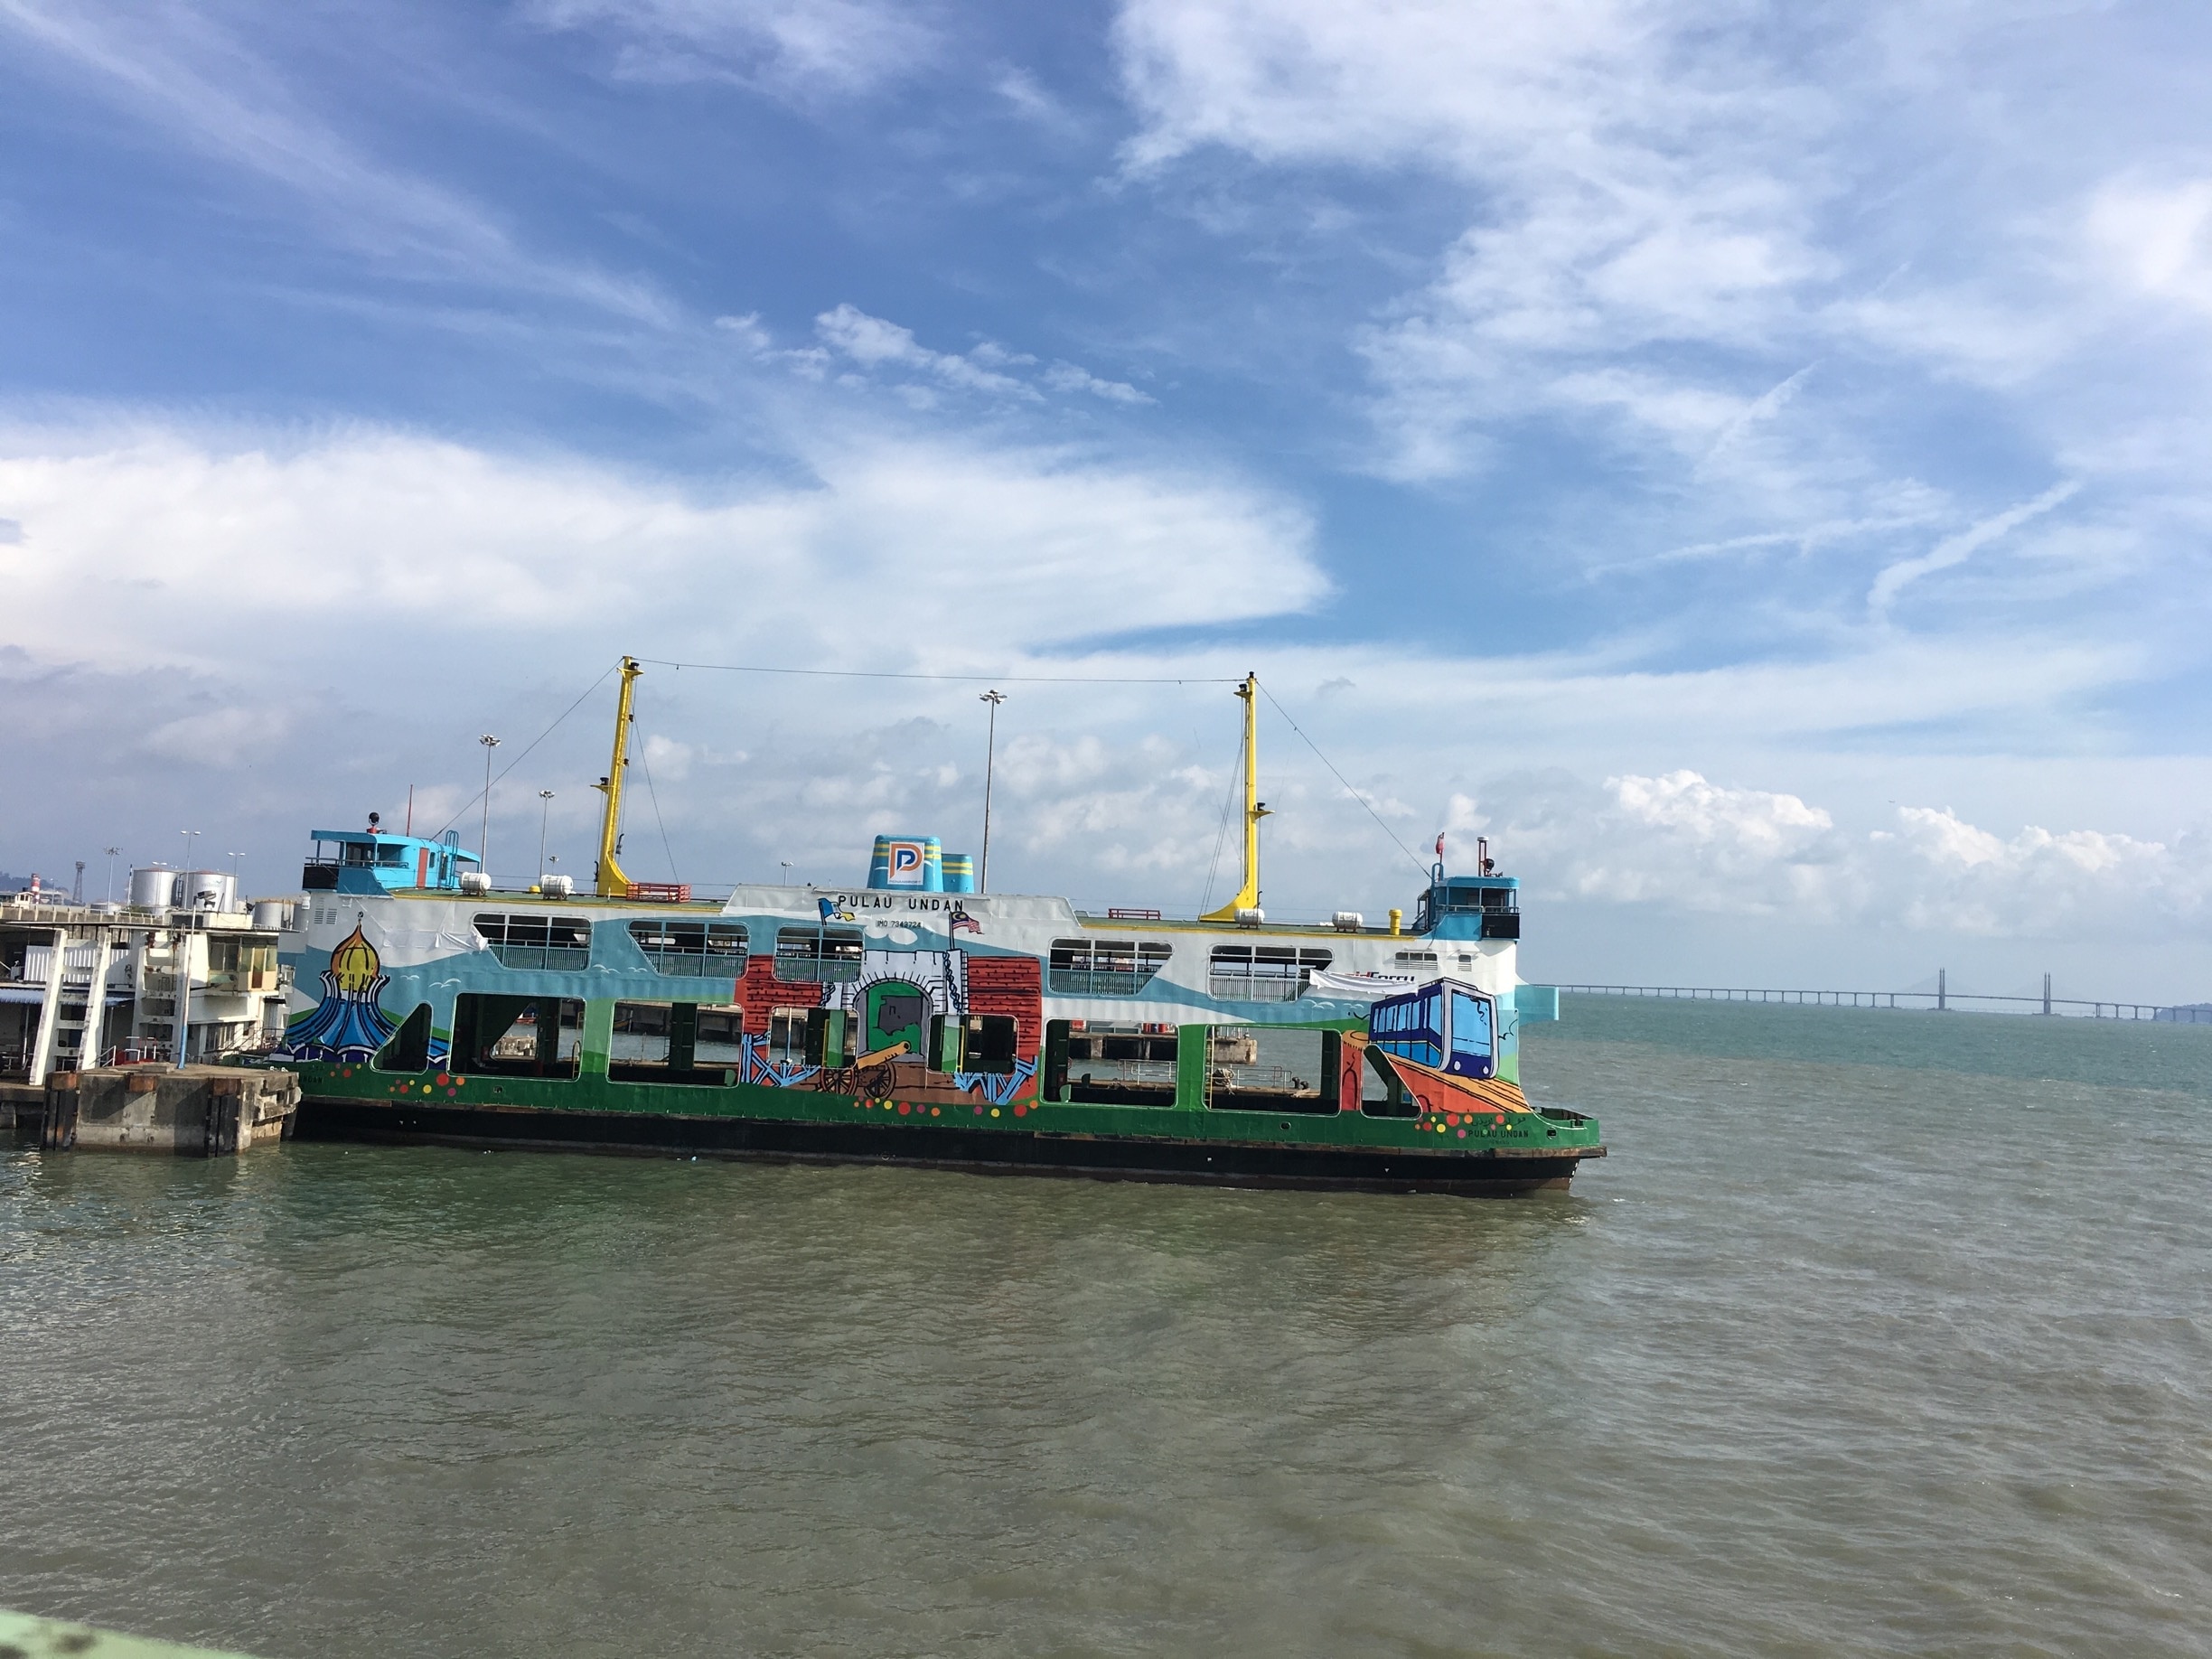 Ferry is the very old public transportation from mainland- Butterworth to Penang Island. May see jellyfish or dolphin if your are lucky..